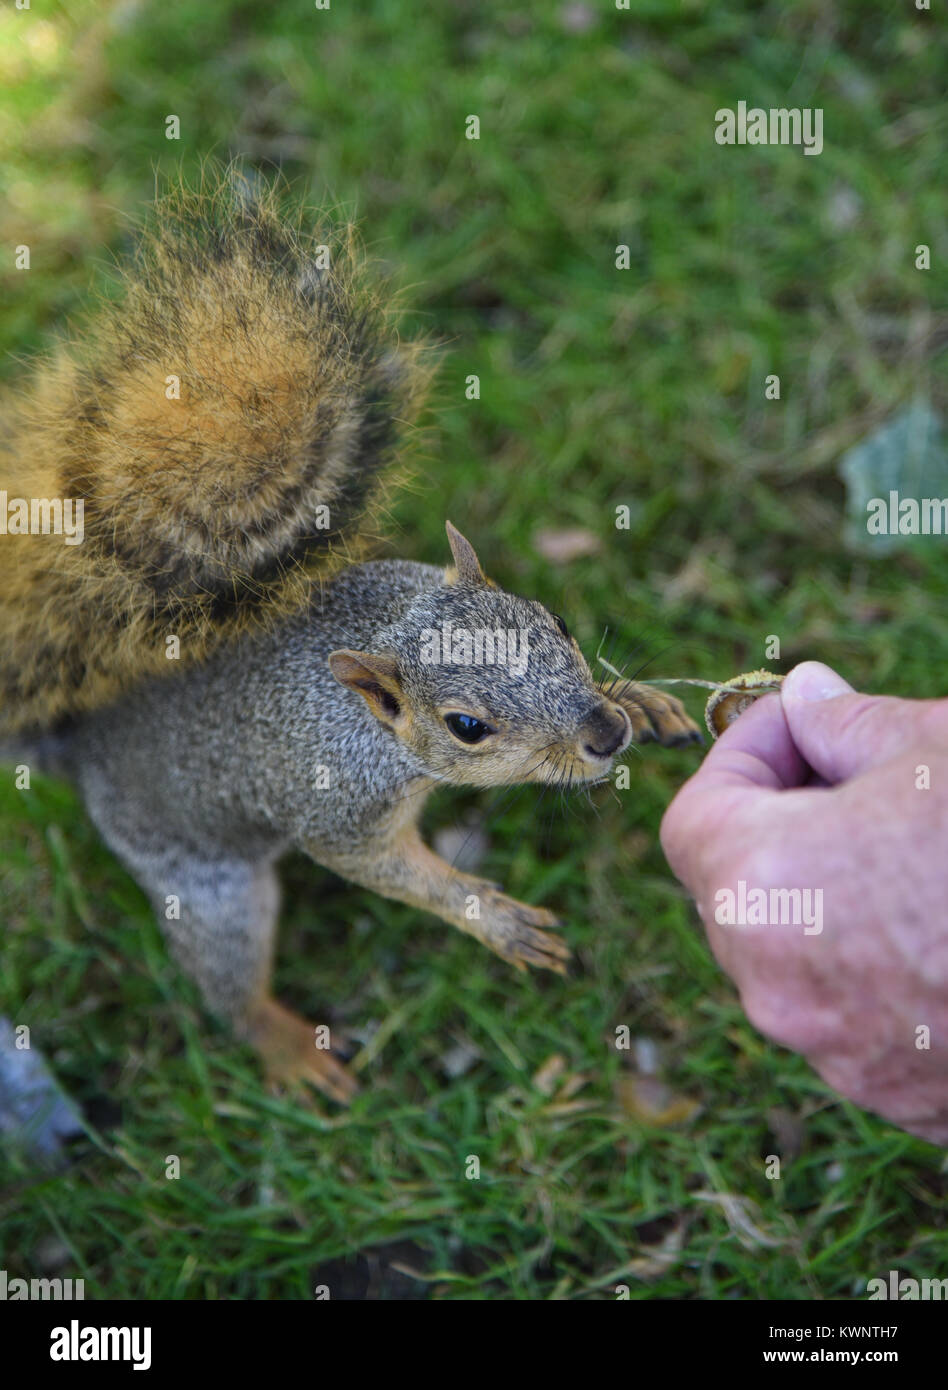 Cute friendly bushy tailed squirrel taking an acorn as food from a mans hand in an outdoor park on green grass Stock Photo